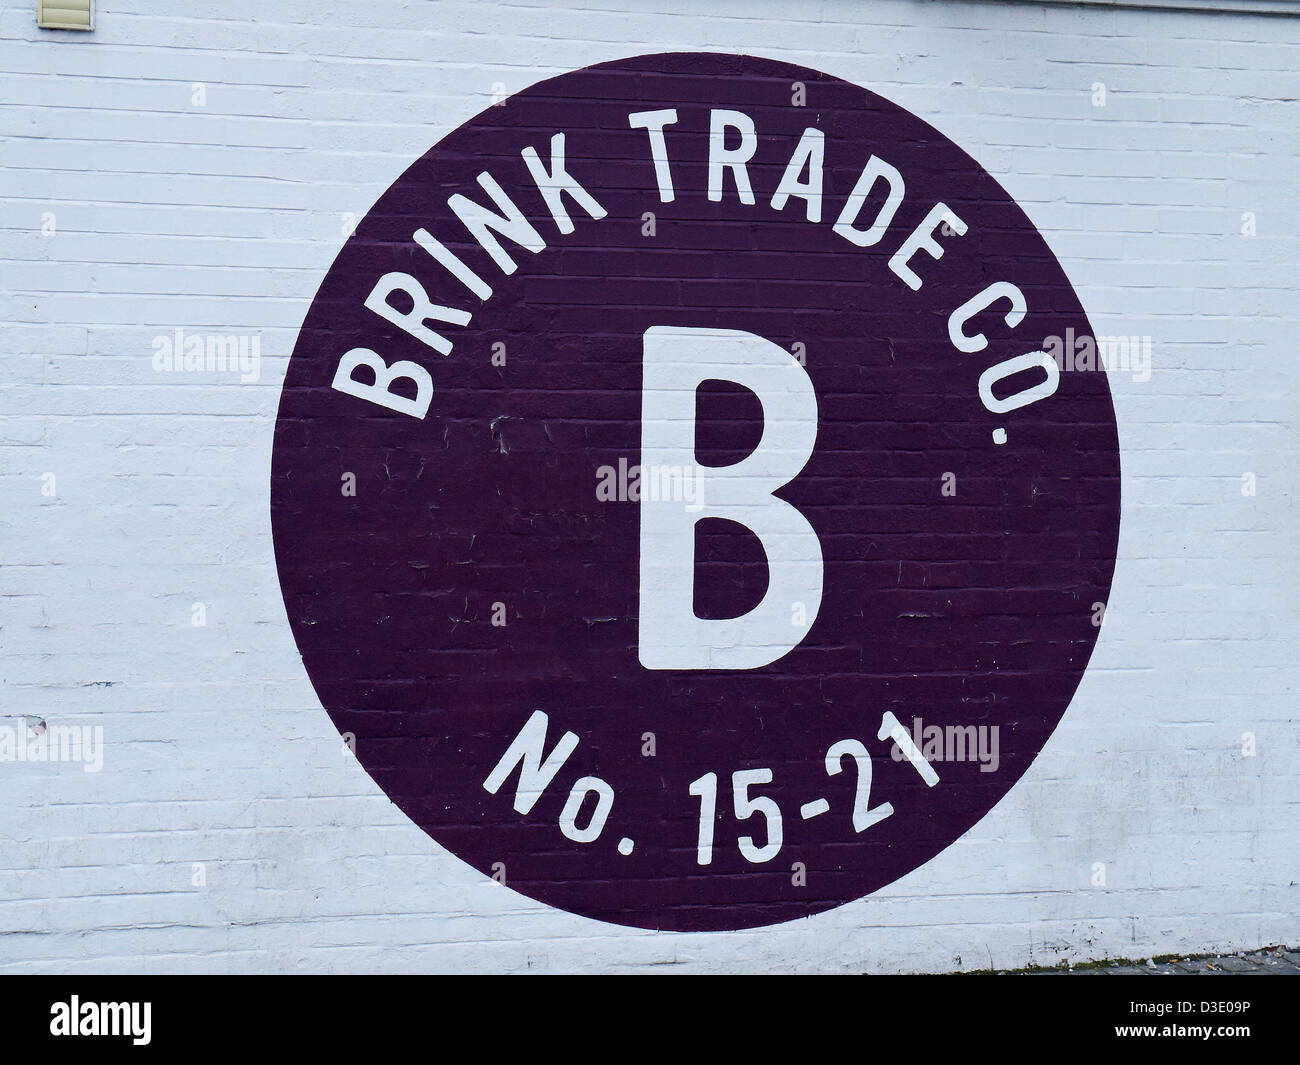 Brink Trade Co sign in Liverpool UK Stock Photo